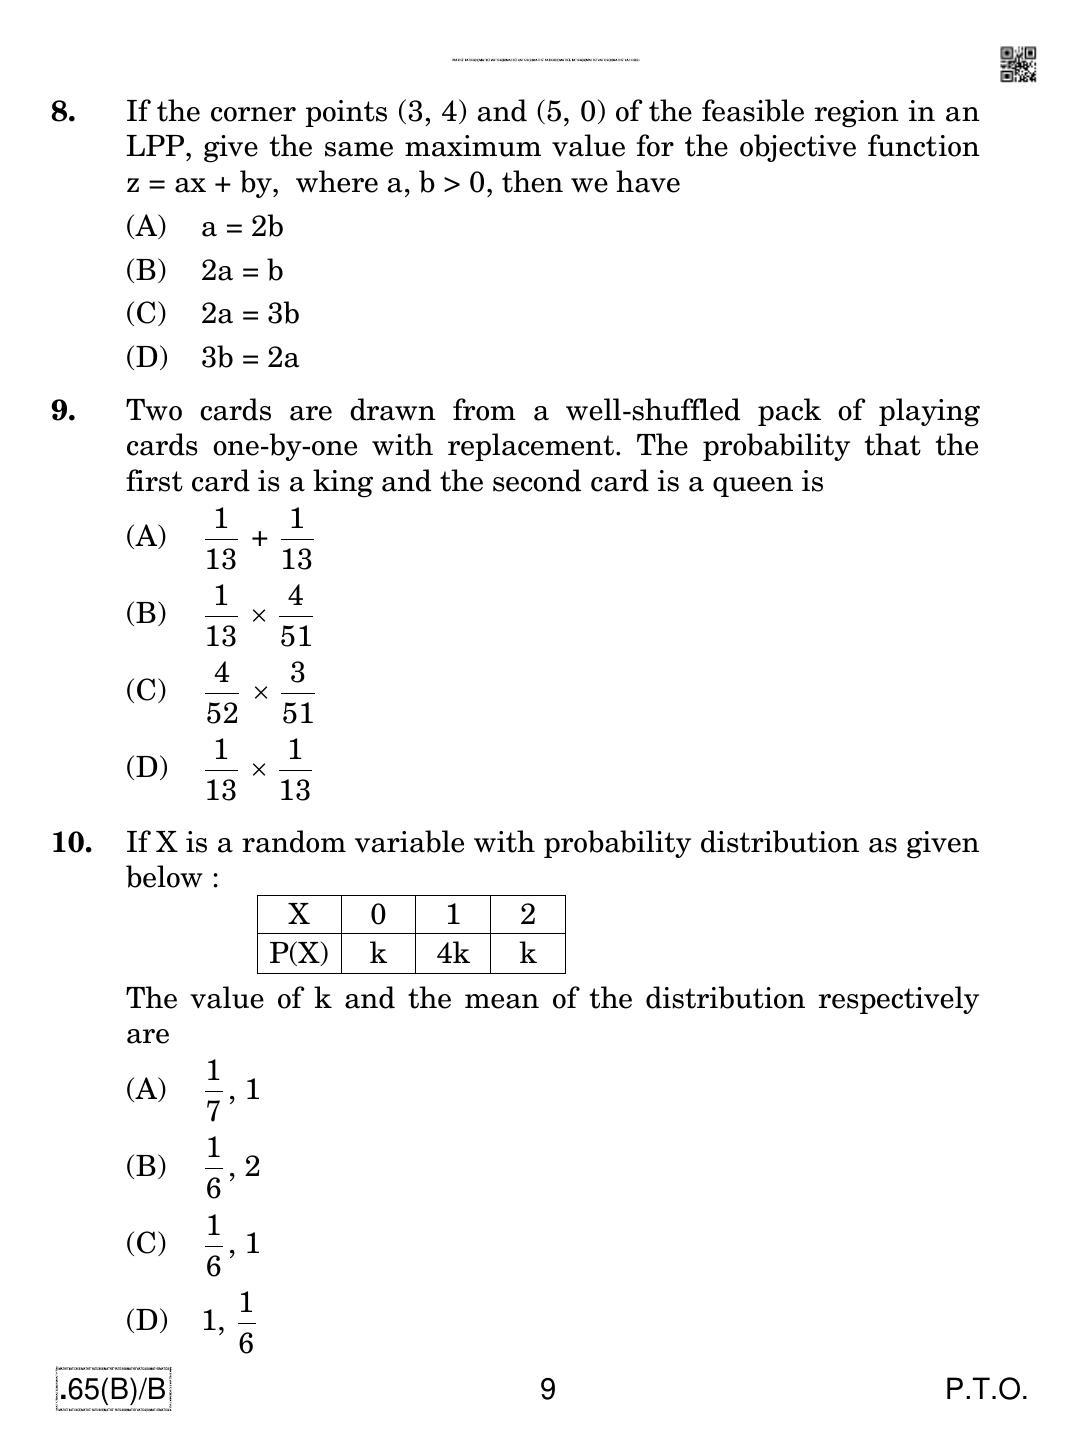 CBSE Class 12 65(B)-C - Maths For Blind Candidates 2020 Compartment Question Paper - Page 9